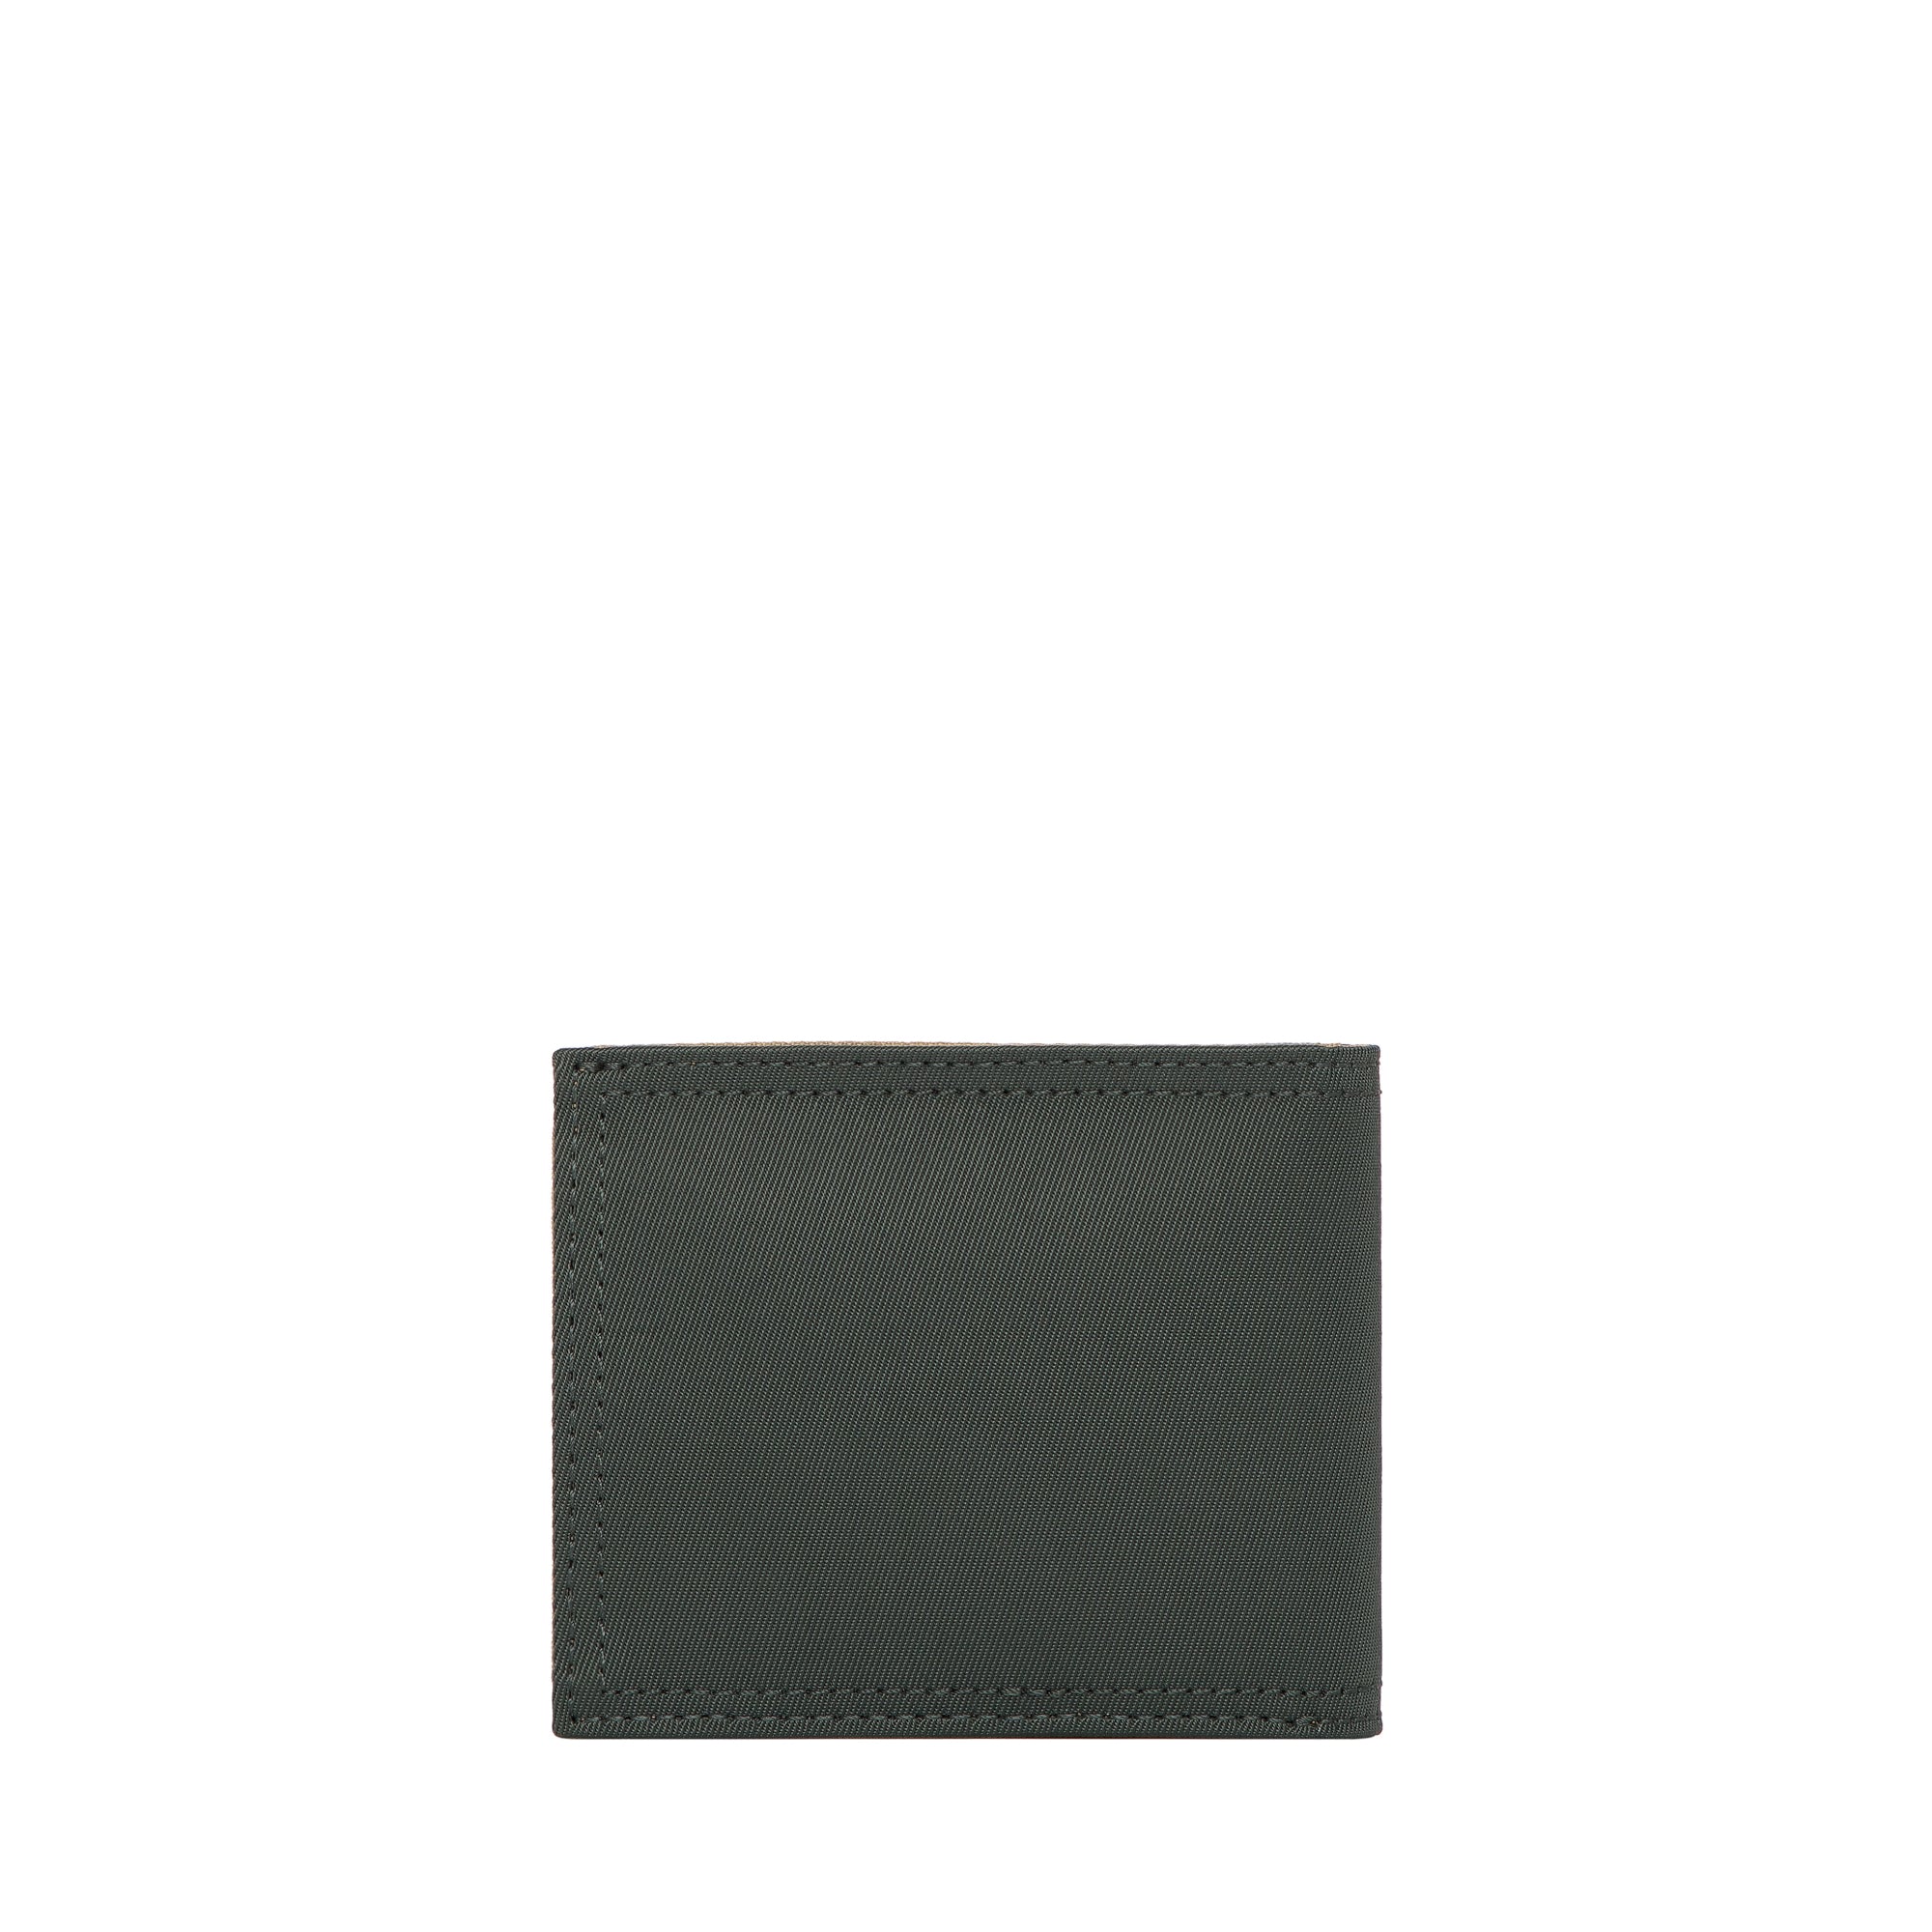 TOUGH JEANSMITH Moment short wallet #TW123-004A